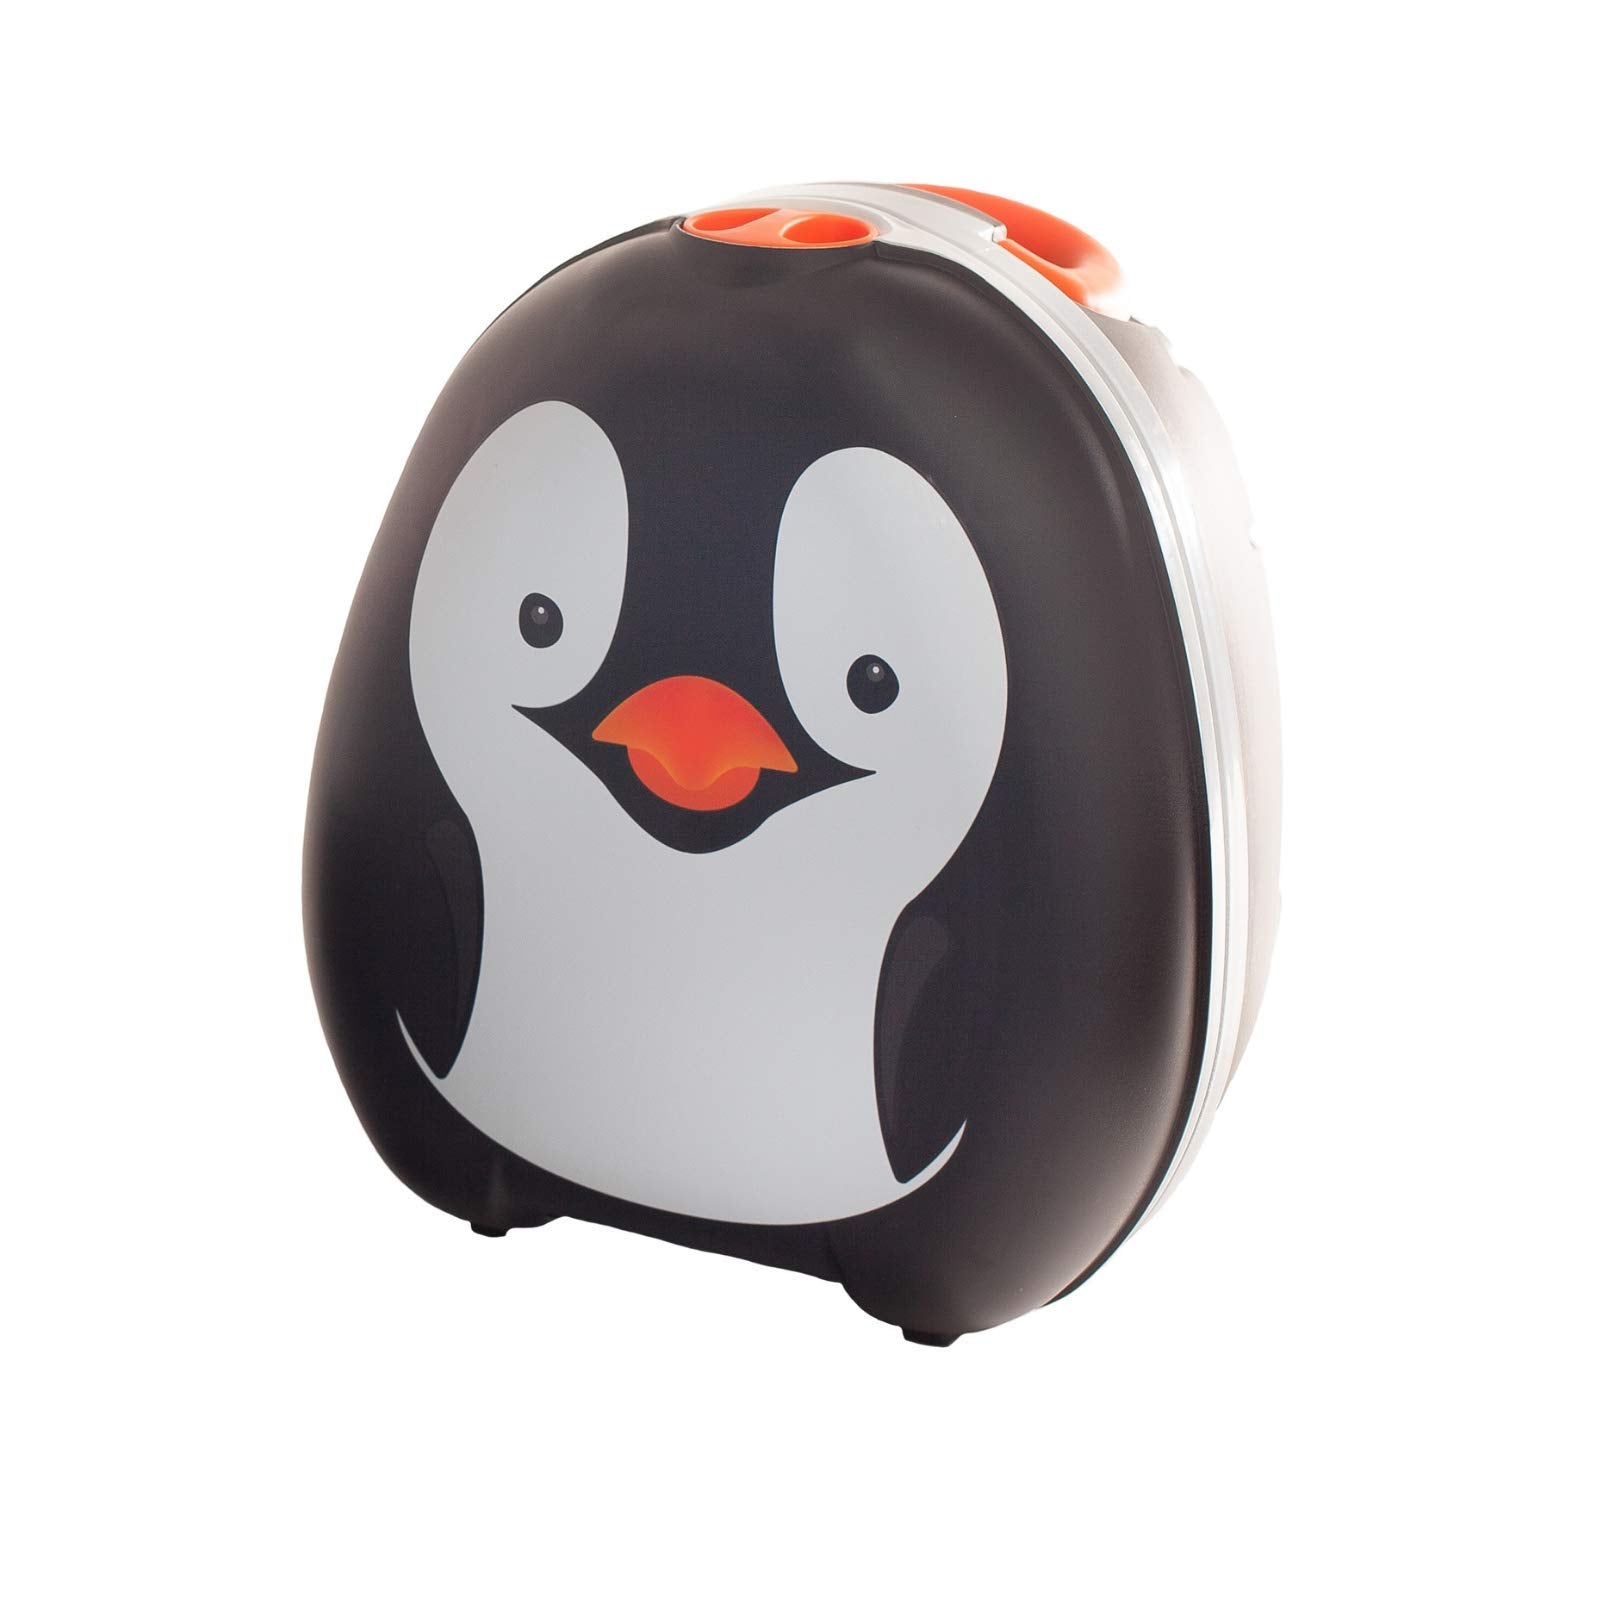 My Carry Potty - Penguin Travel Potty, Award-winning Portable Toddler Toilet Seat For Kids To Take Everywhere